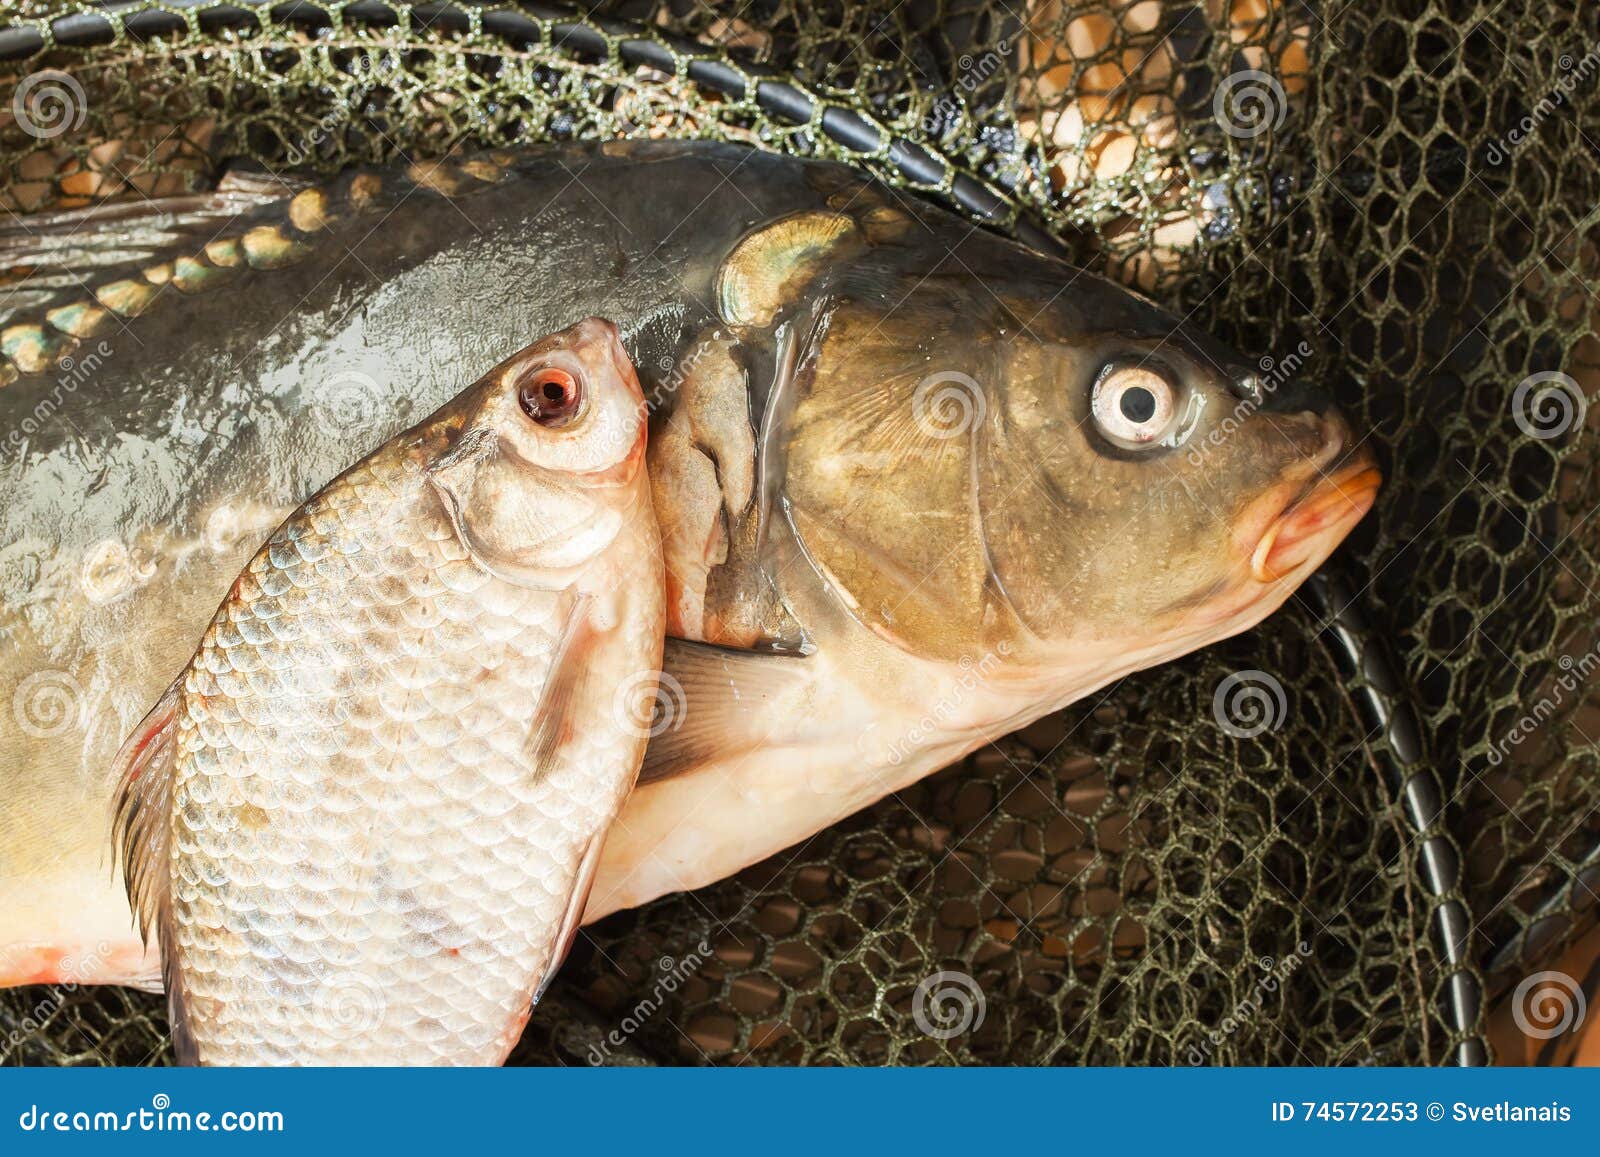 Fish on Net Basket, Concept of Country Recreation Stock Image